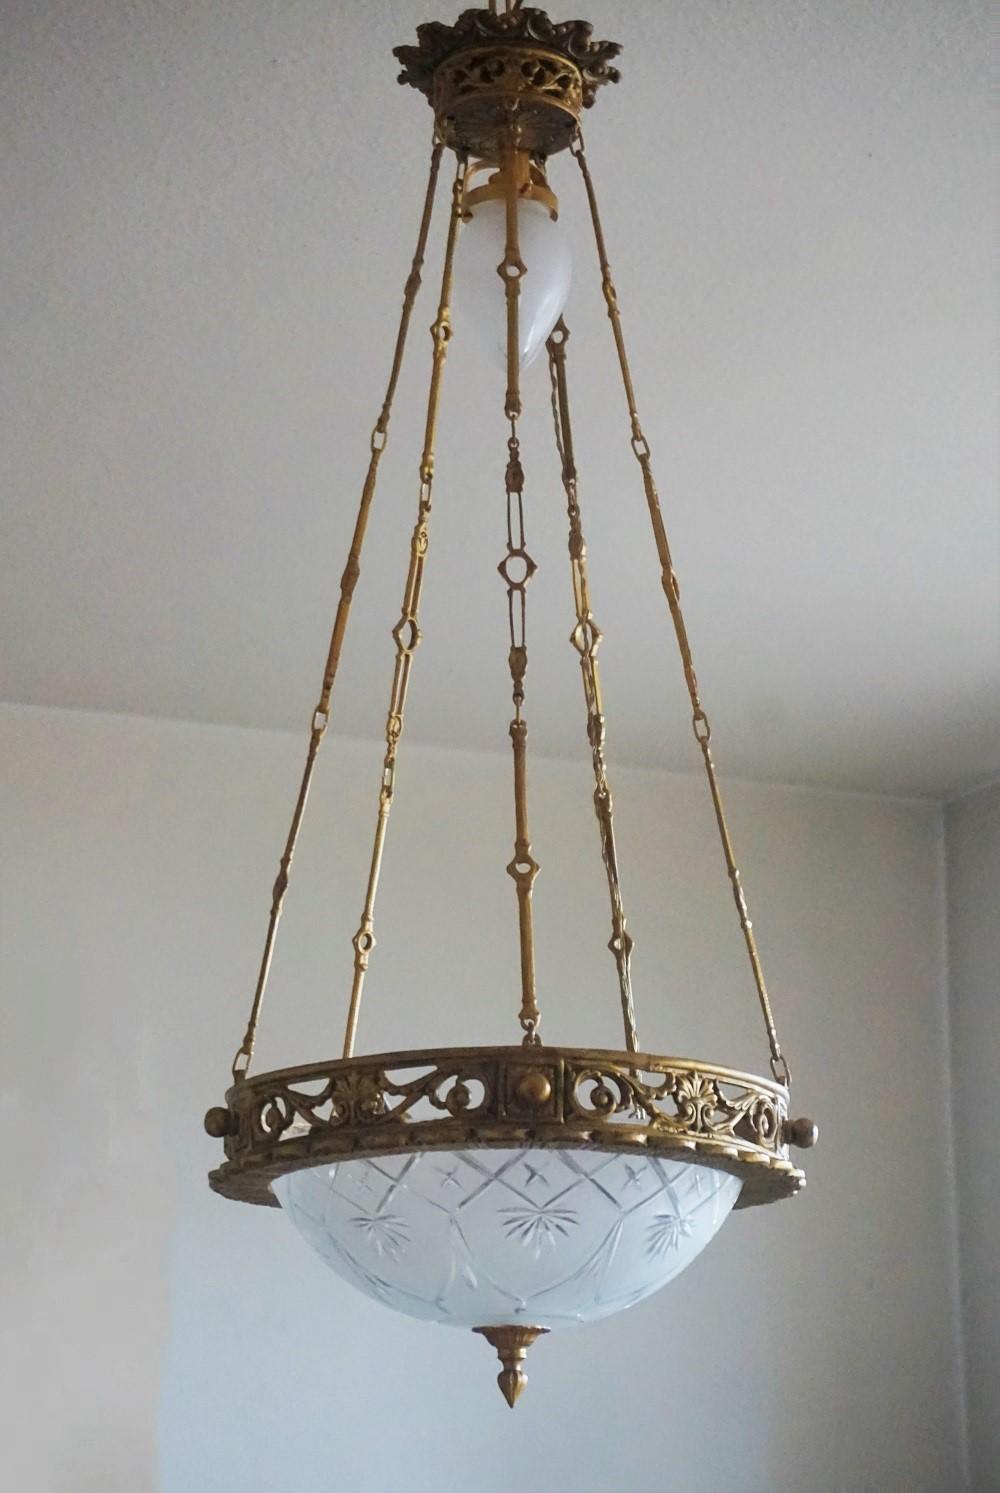 A beautiful Art Deco chandelier with very elegant design, crown-shaped of gilt bronze with a satin handcut glass dome shade and a small shade hanging from the top, all supported by five bronze chains connected to a crown decorative canopy, France,